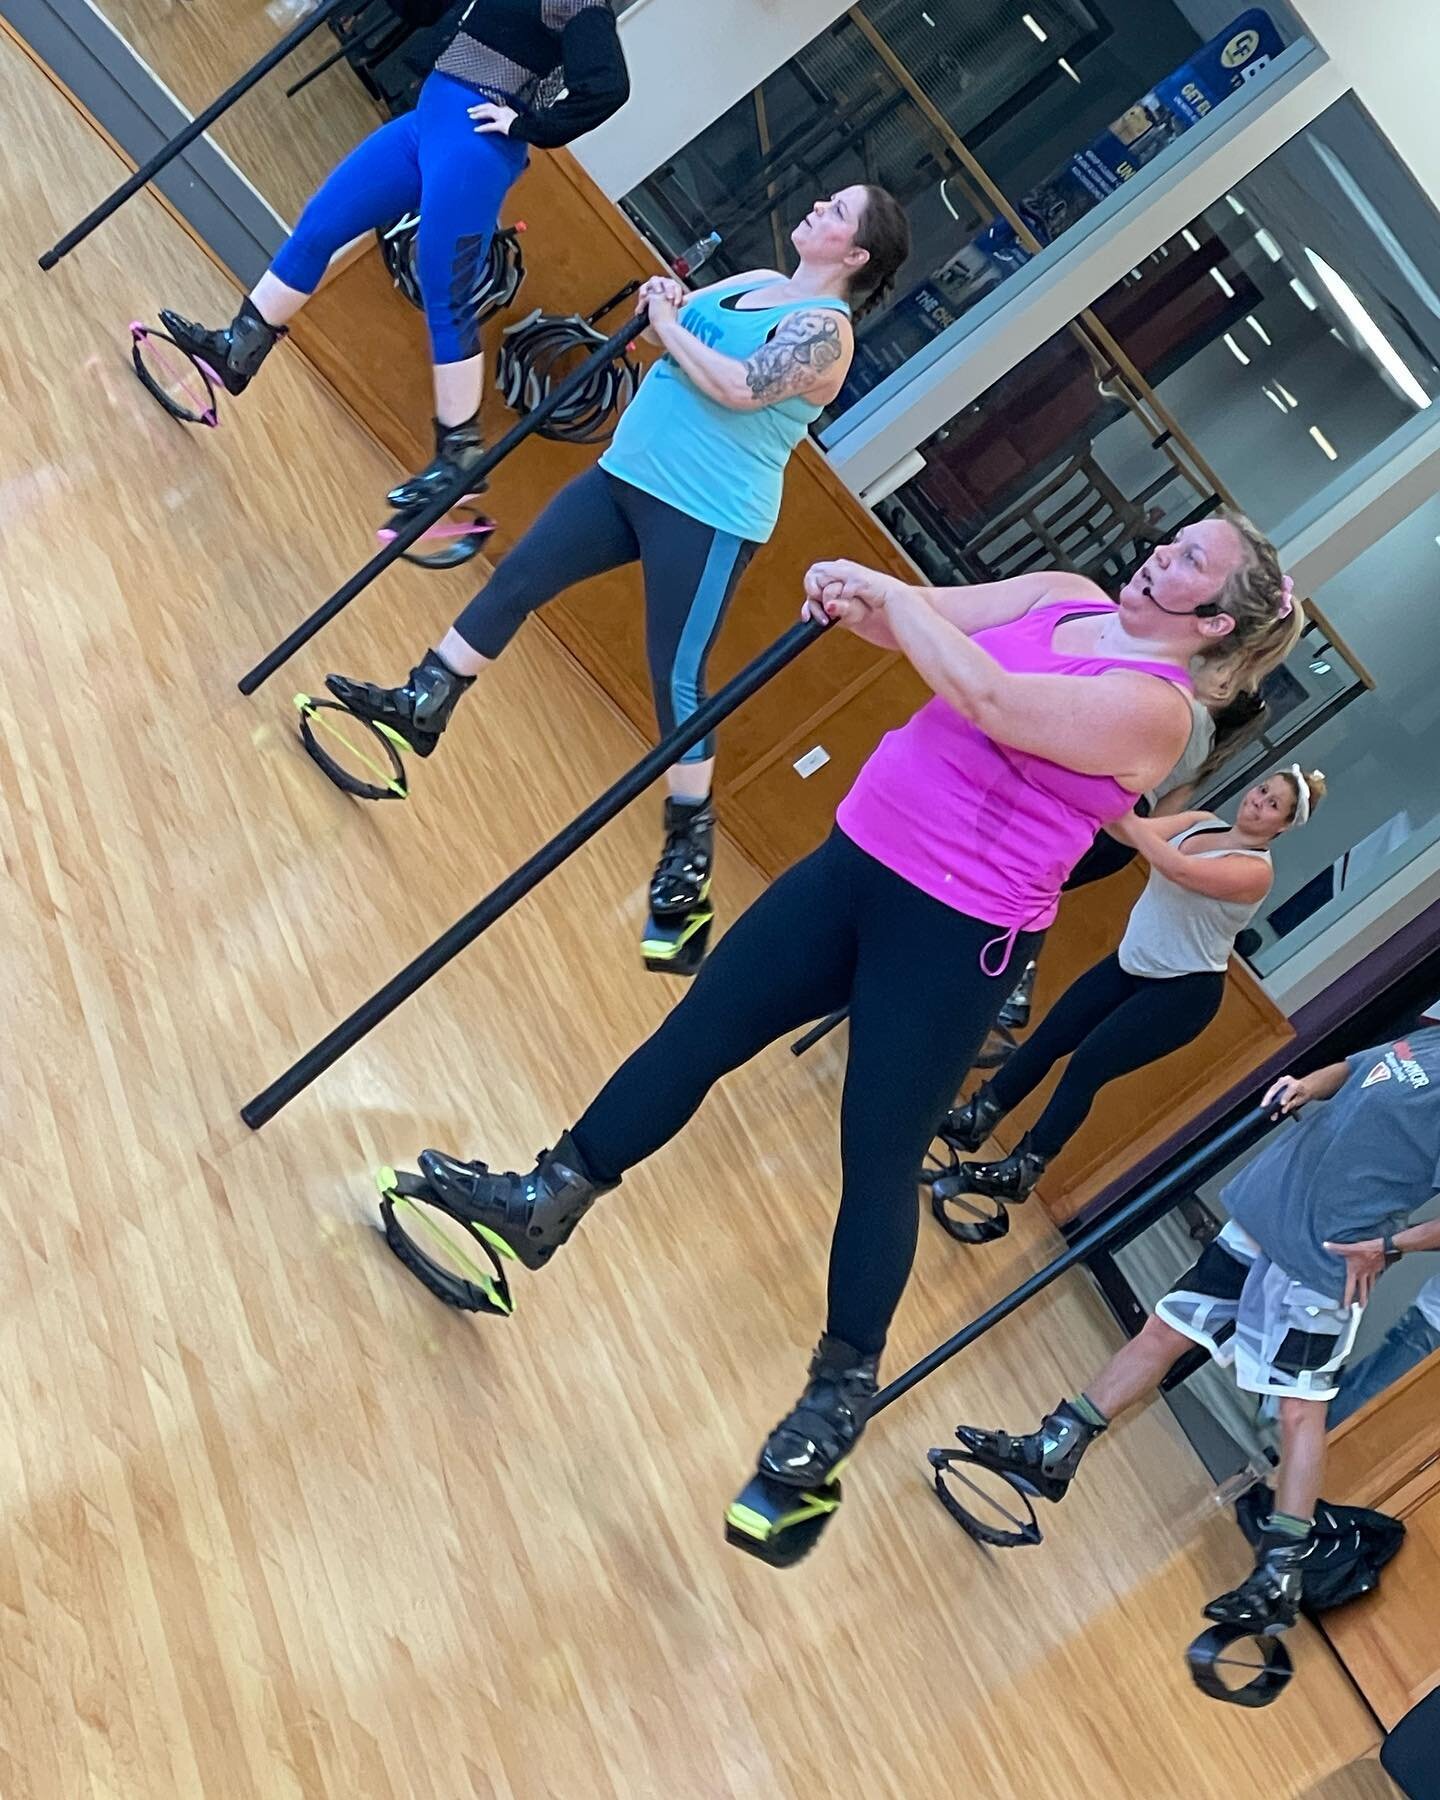 🍑Tighten &amp; Tone it again 6:30pm tomorrow Wednesday w/ Stacie just added in Danvers @cfelitedanvers.

👙☀️ Summa is coming ☀️ 👙 

💕Tag &amp; Grab ya friends share the 💕get 3 Free classes for every friend that signs up to jump&rsquo; 

Jump in 